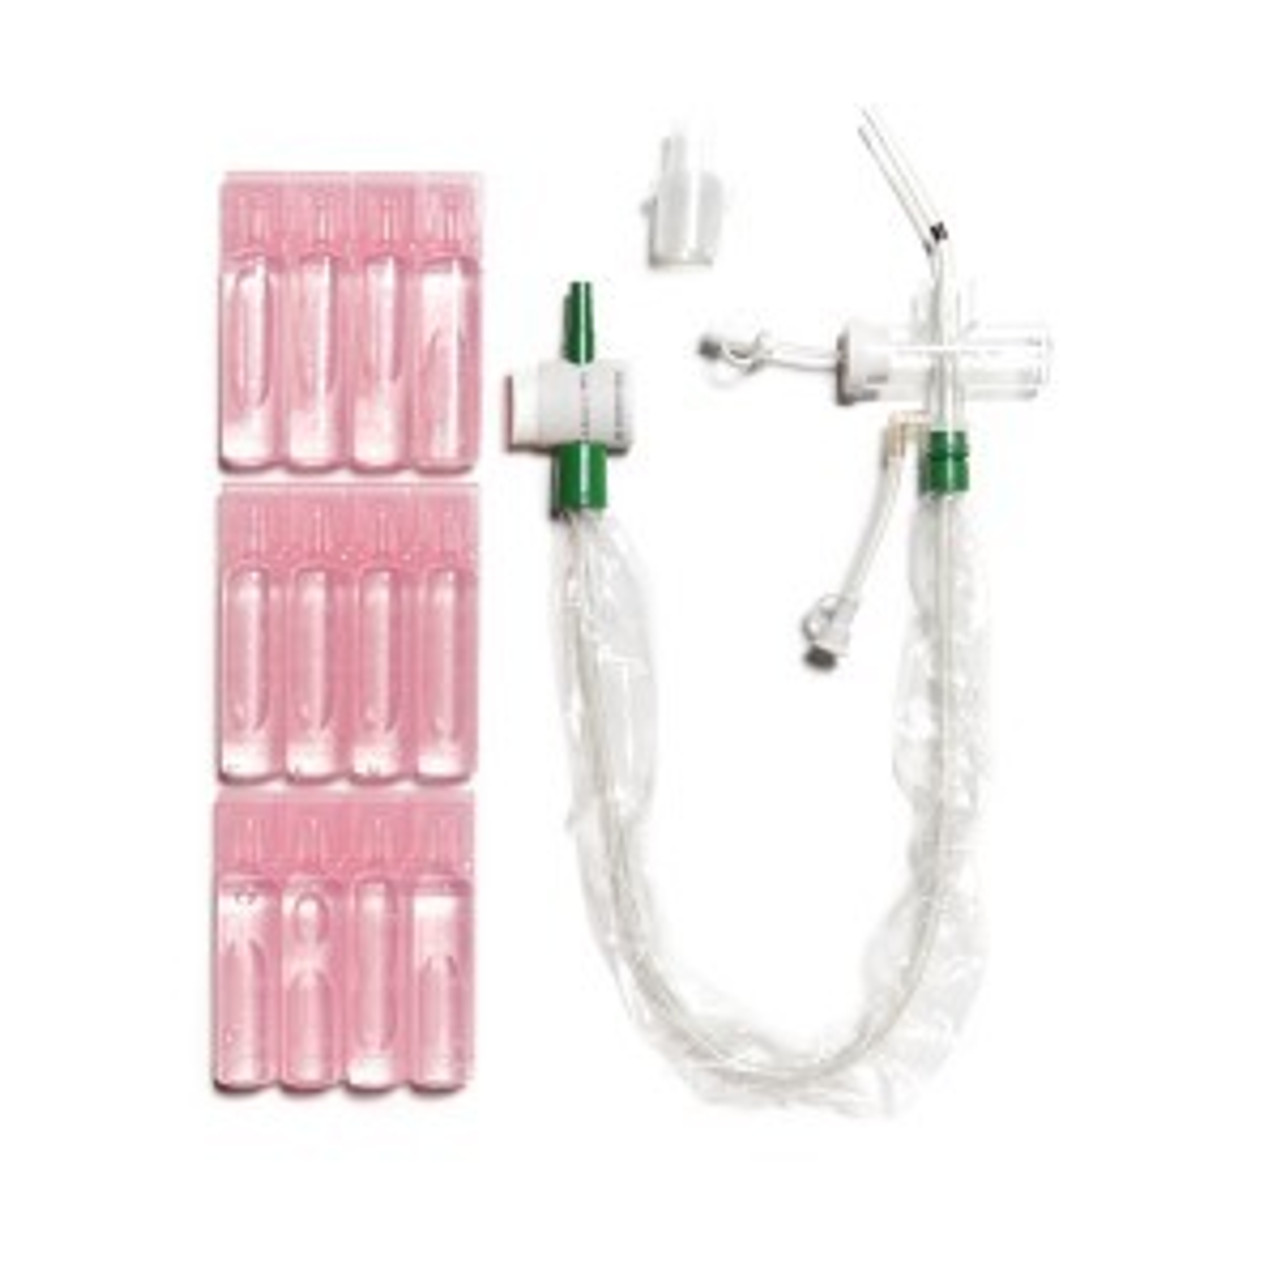 Halyard Kimguard Closed Suction System, Adult, 14FR, T-Piece, Endotracheal Length, Wet Pack, MDI, 20/cs